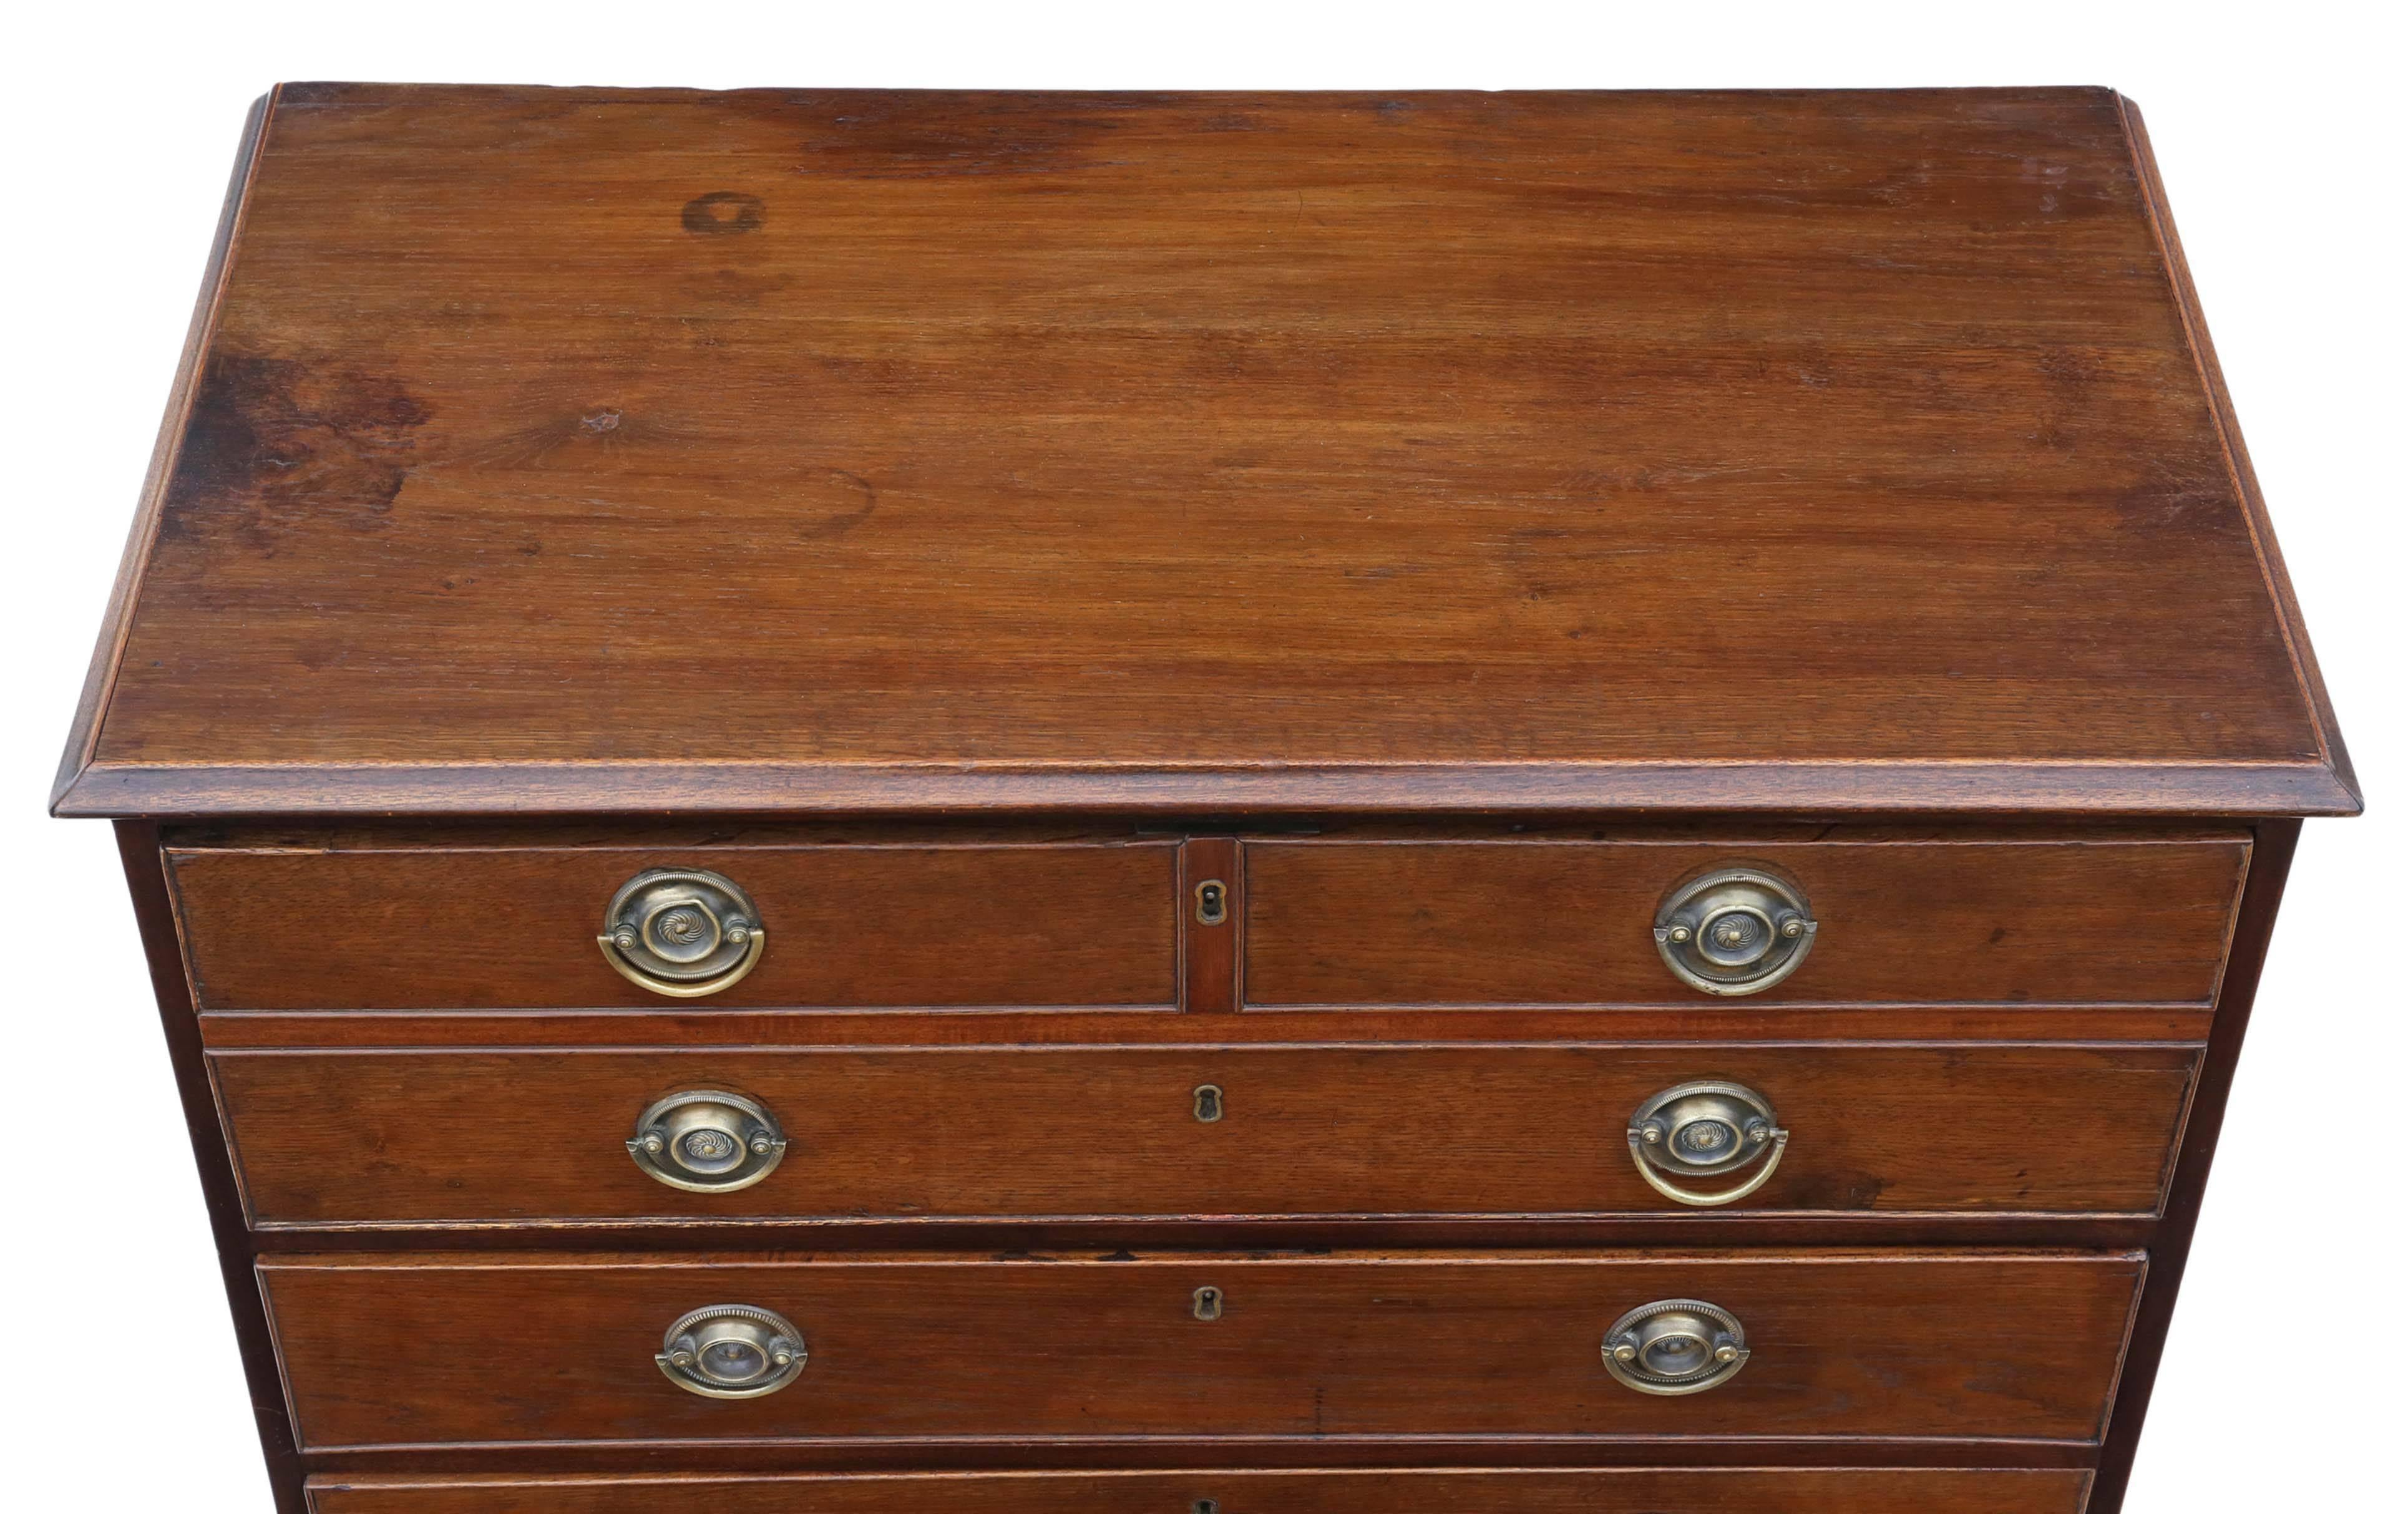 Antique Georgian / Regency elm secretaire desk writing chest of drawers, circa 1800-1830.

A lovely item, that is full of age, charm and character. Old patinated leather skiver (not original).

Solid with no loose joints and the drawers slide